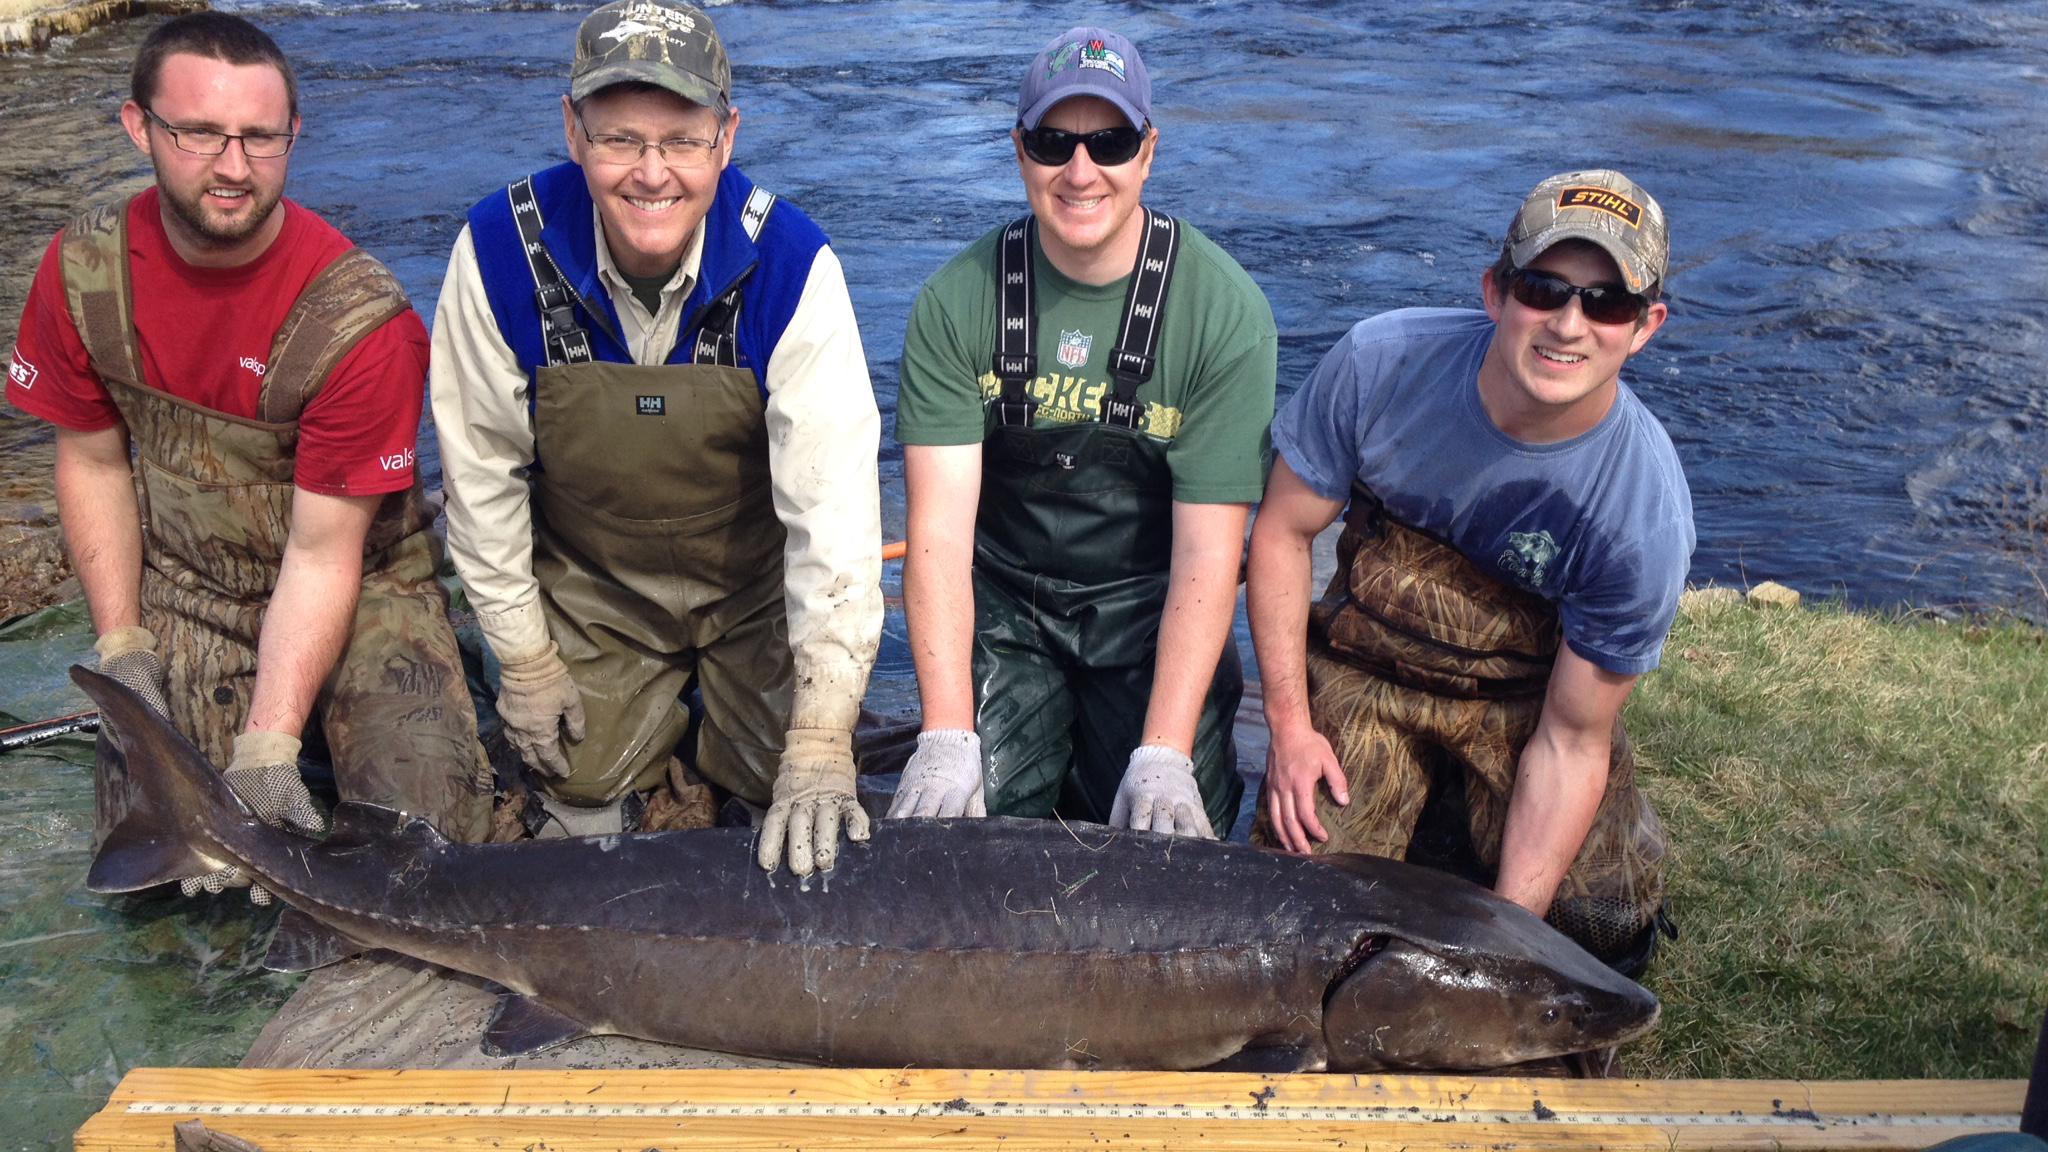 Left and right are two student volunteers from UW Stevens Point. Middle left is Ron Bruch (retired Sturgeon Biologist from Winnebago System), Middle Right is Ryan Koenigs (current Sturgeon Biologist). This is a 77